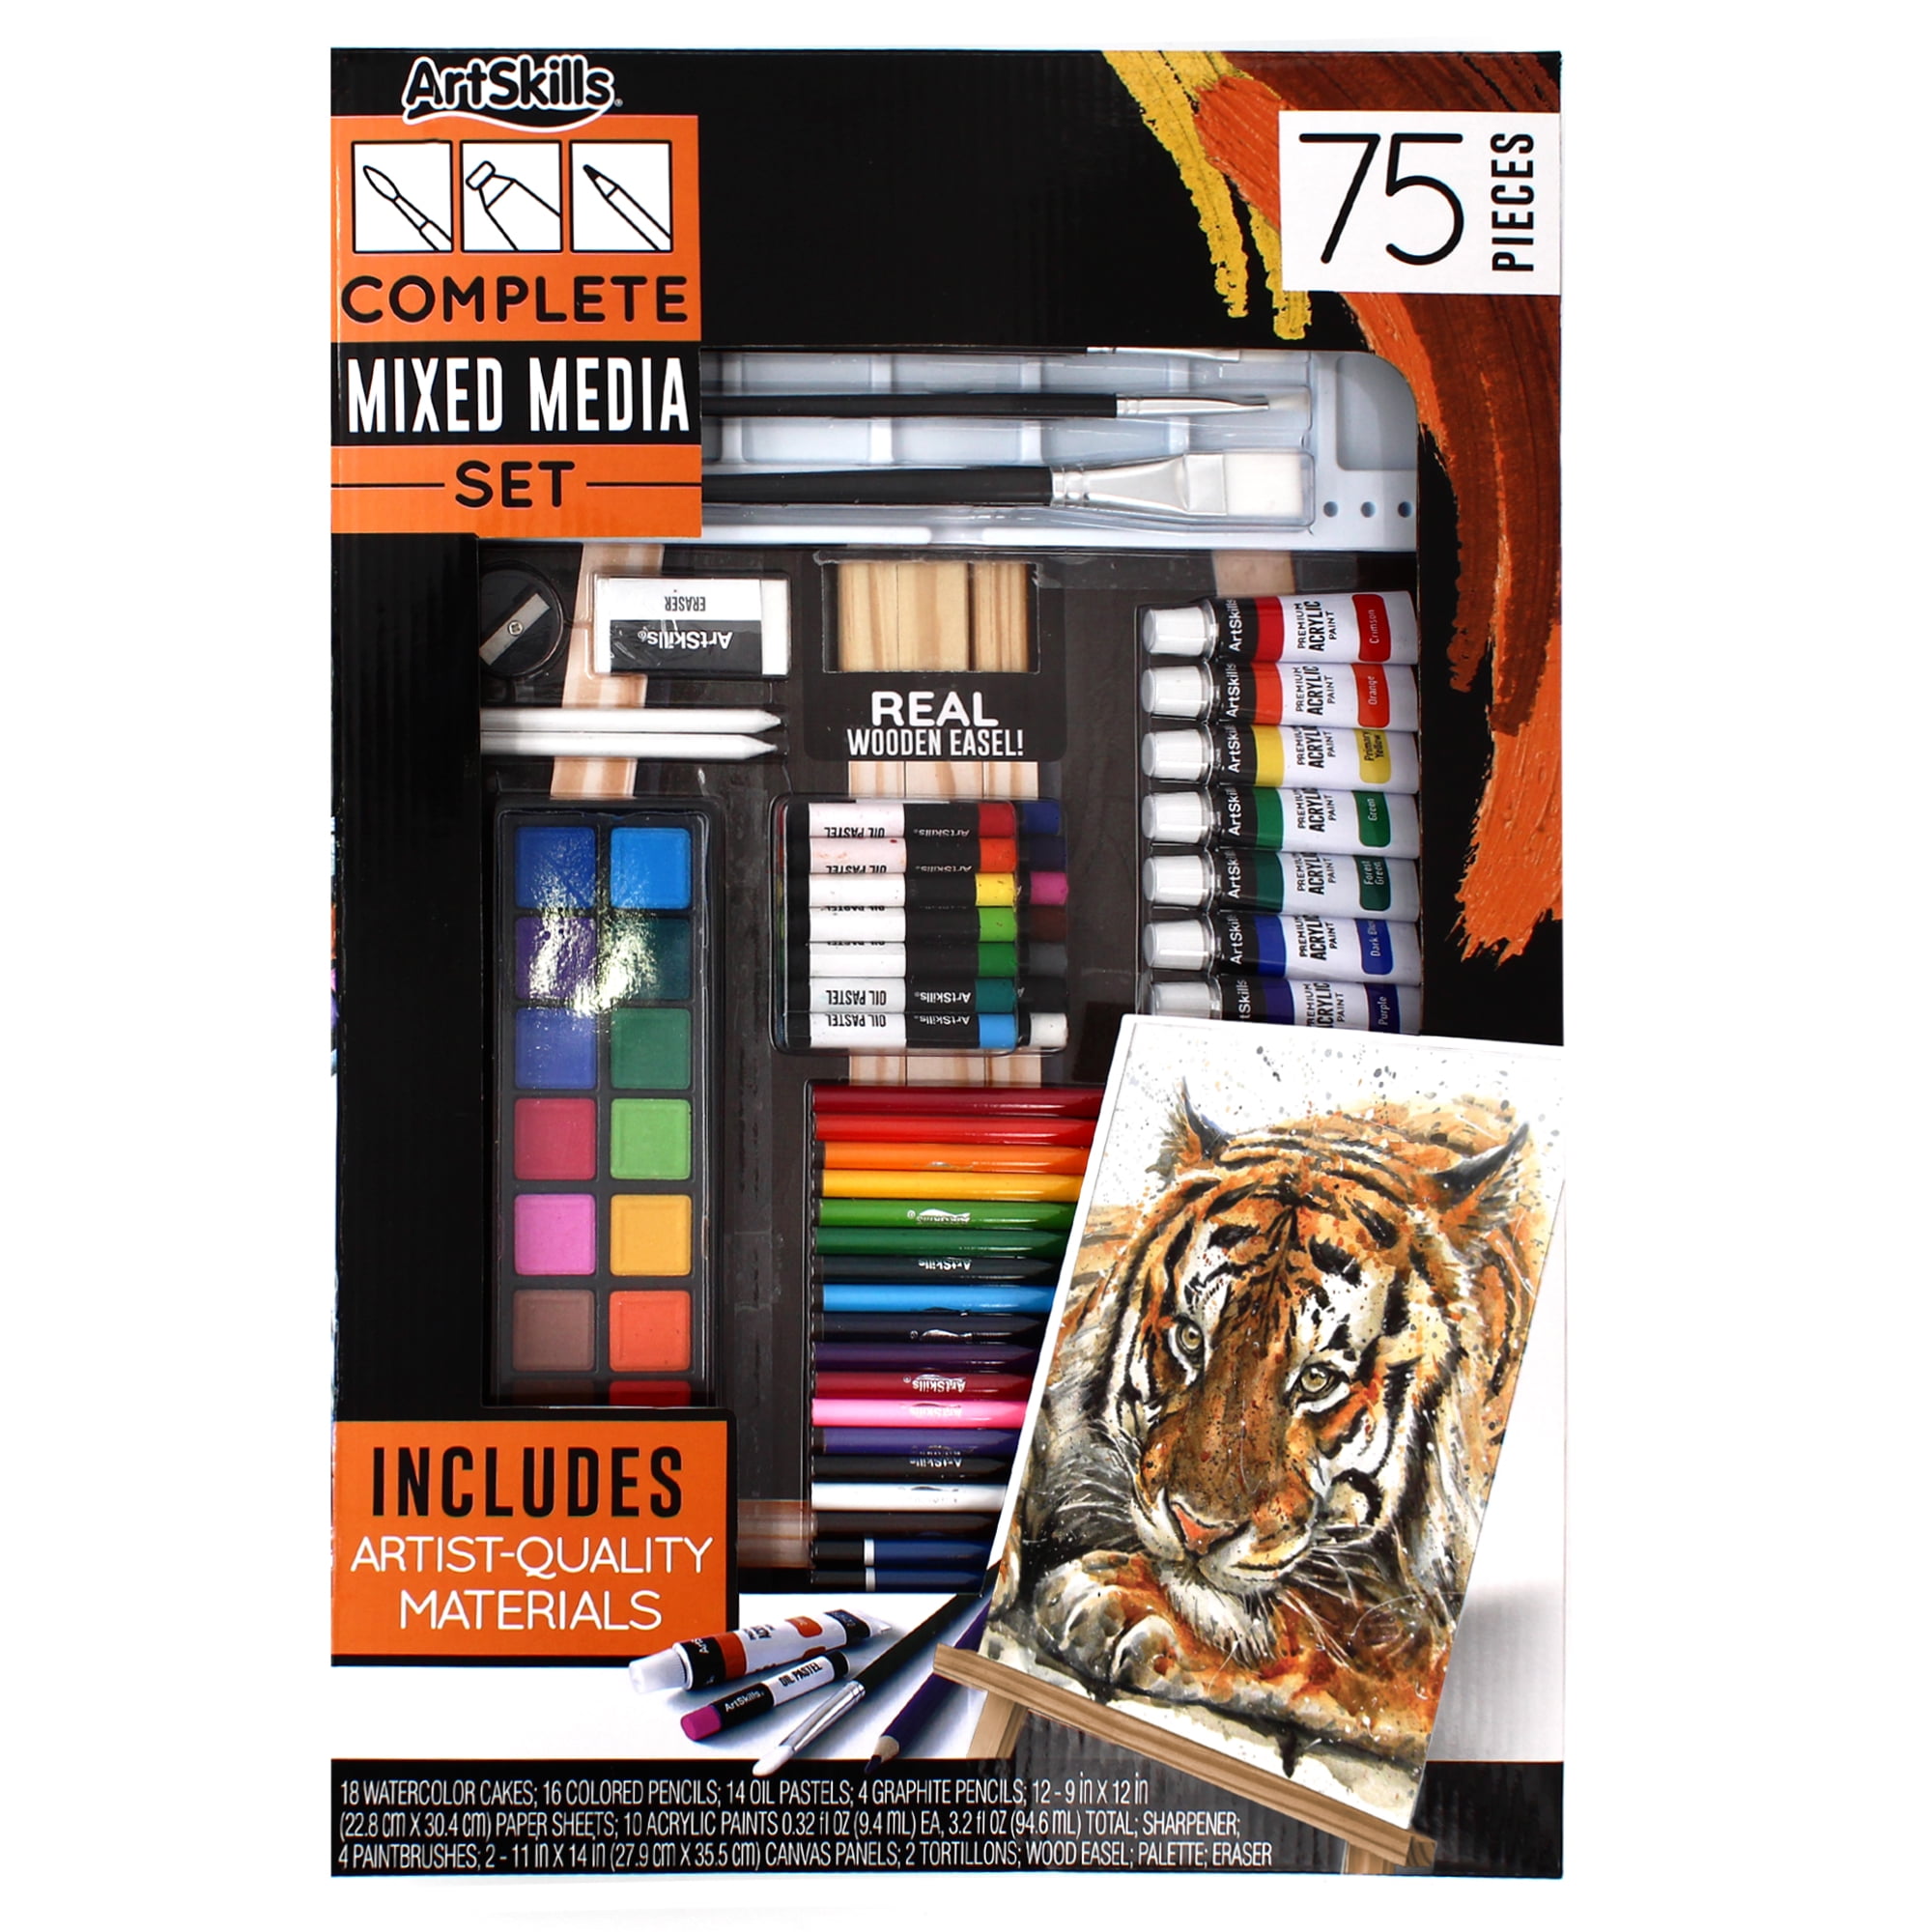 Artskills Door Easel Art Kit with Paper, Markers and More